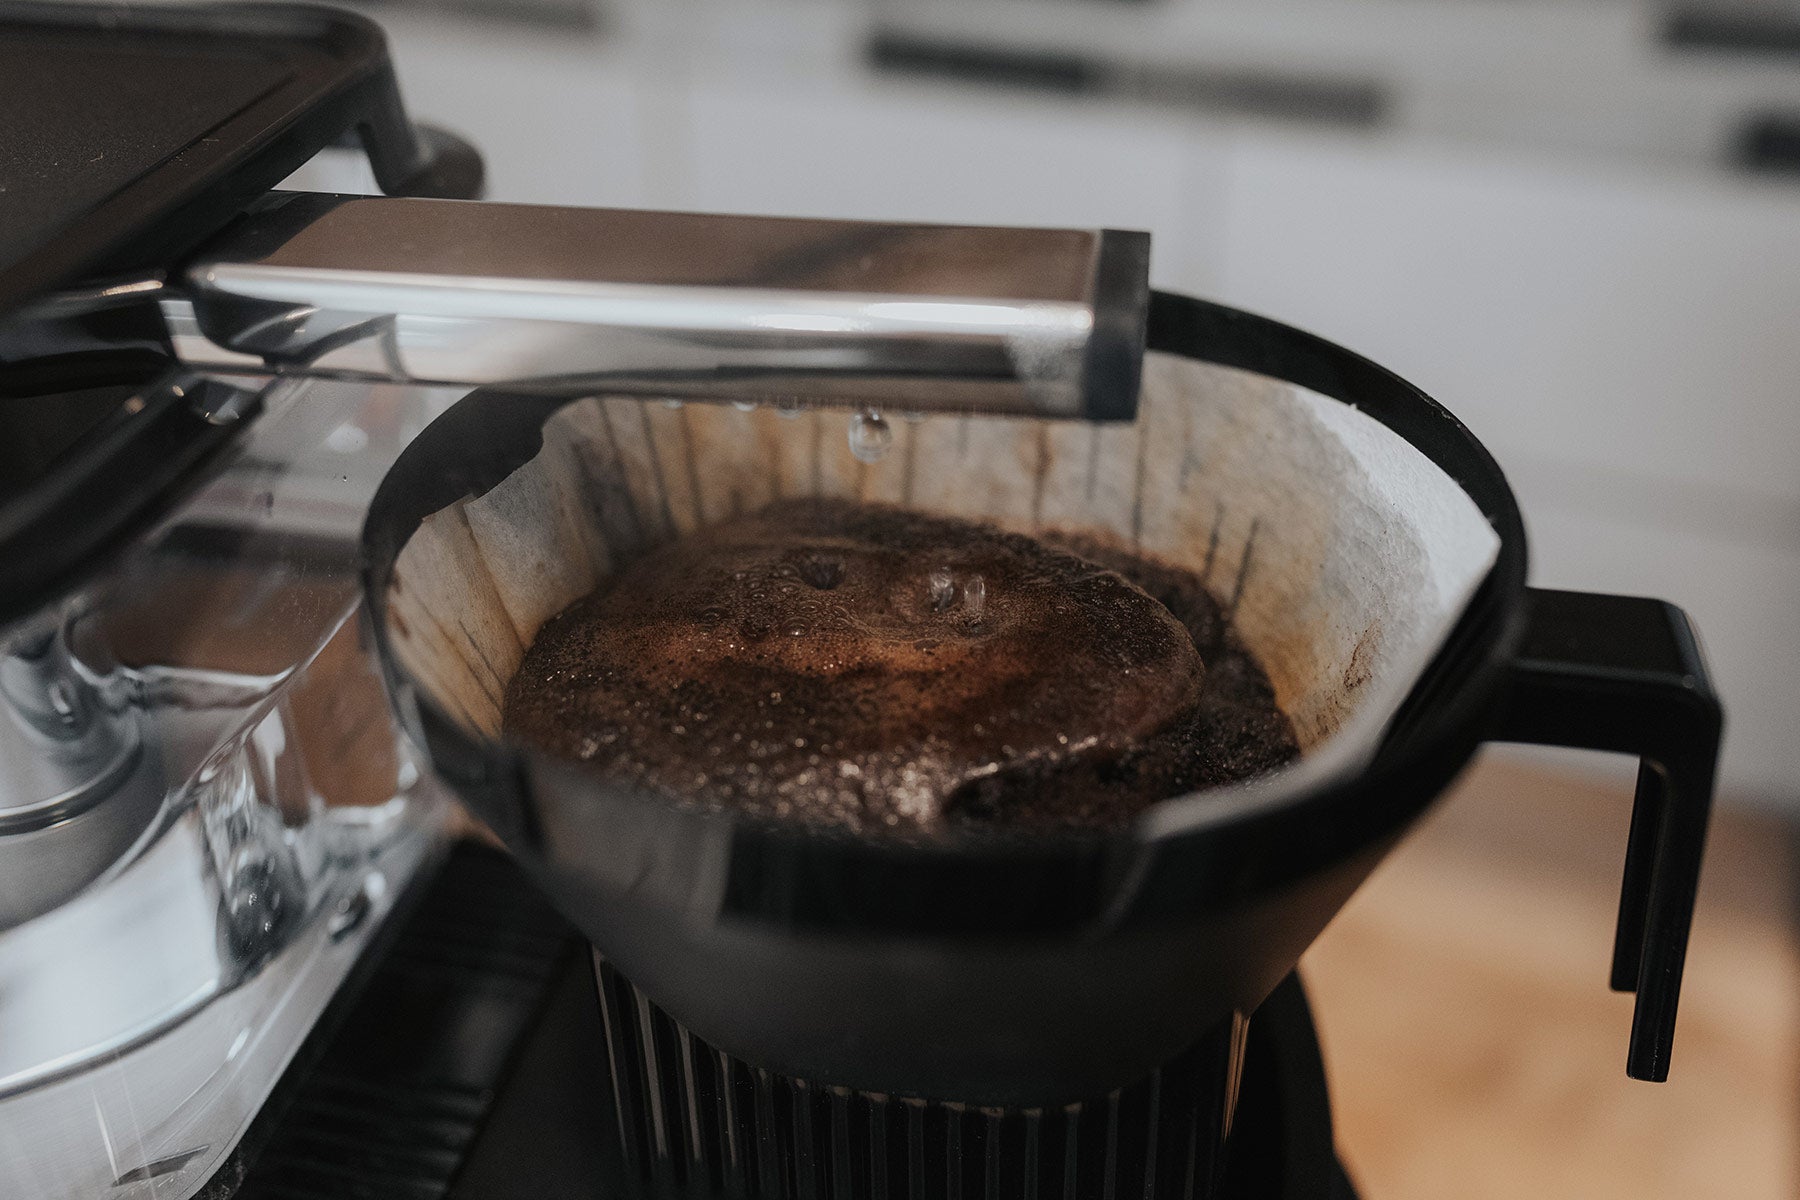 Coffee Filter Guide: 5 Things to Know About Coffee Filters